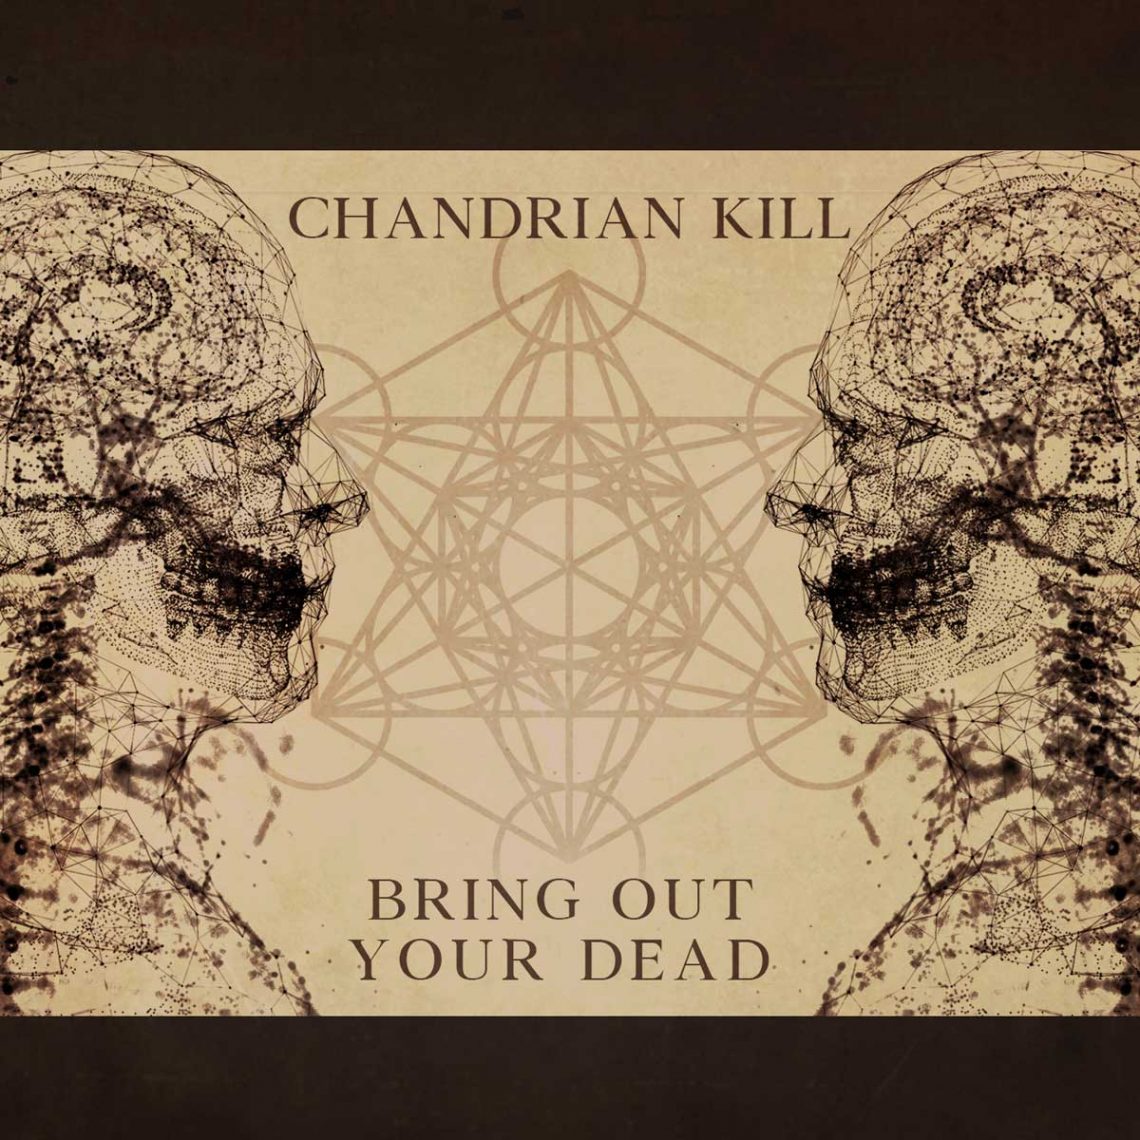 Ex Number One Son & Moesaboa members return with new band Chandrian Kill